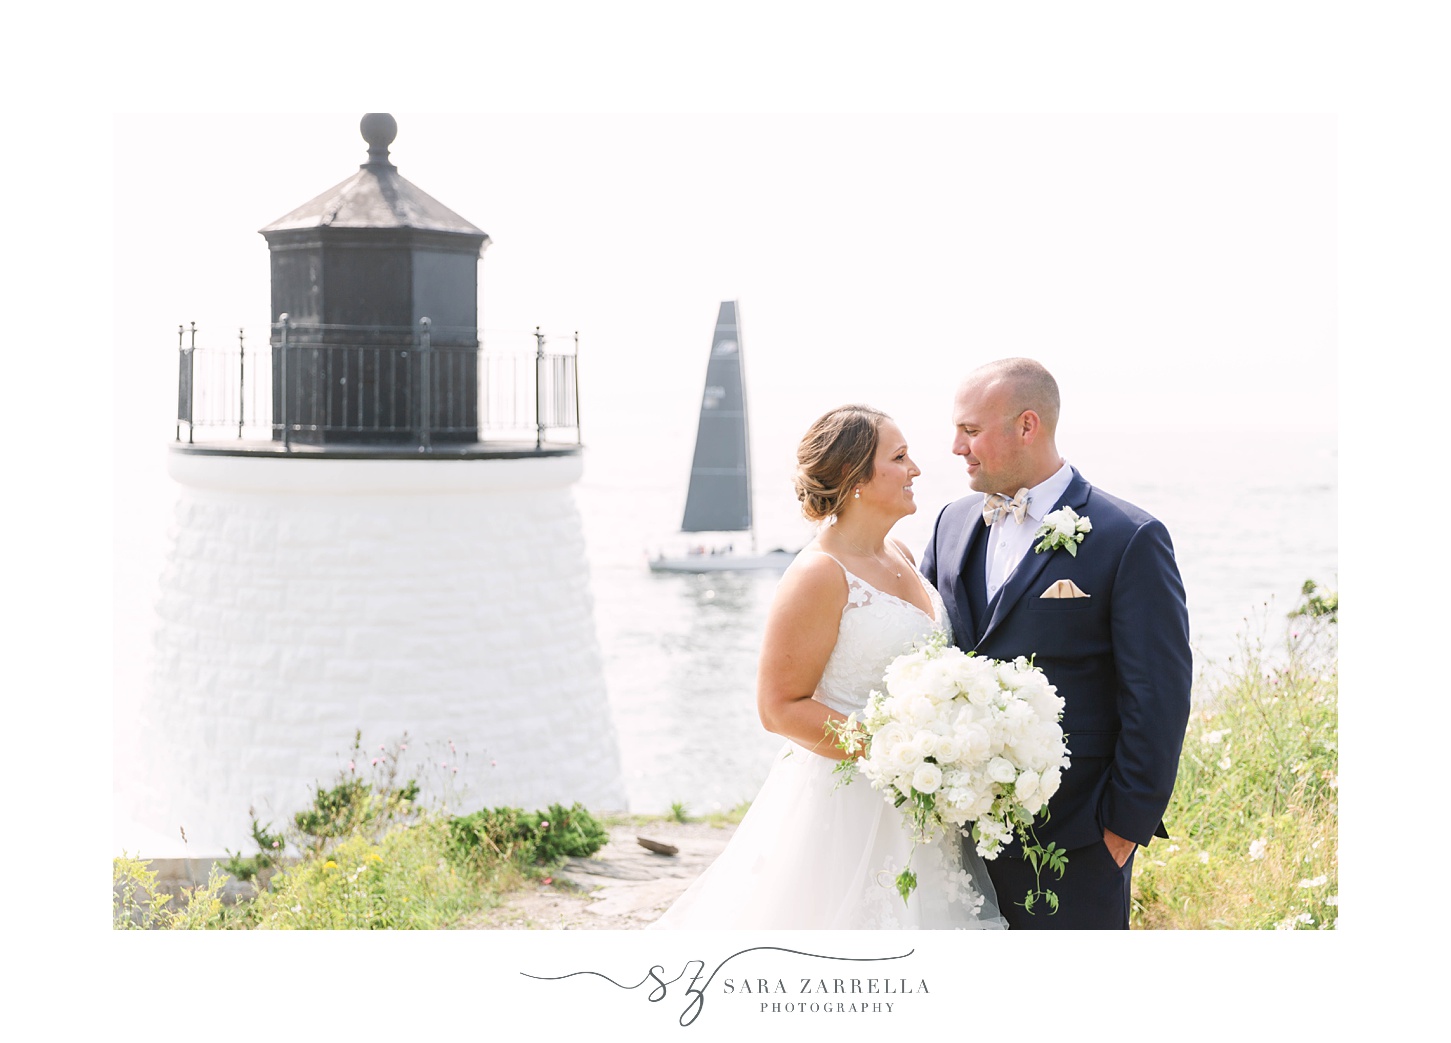 newlyweds pose by white lighthouse in Newport RI